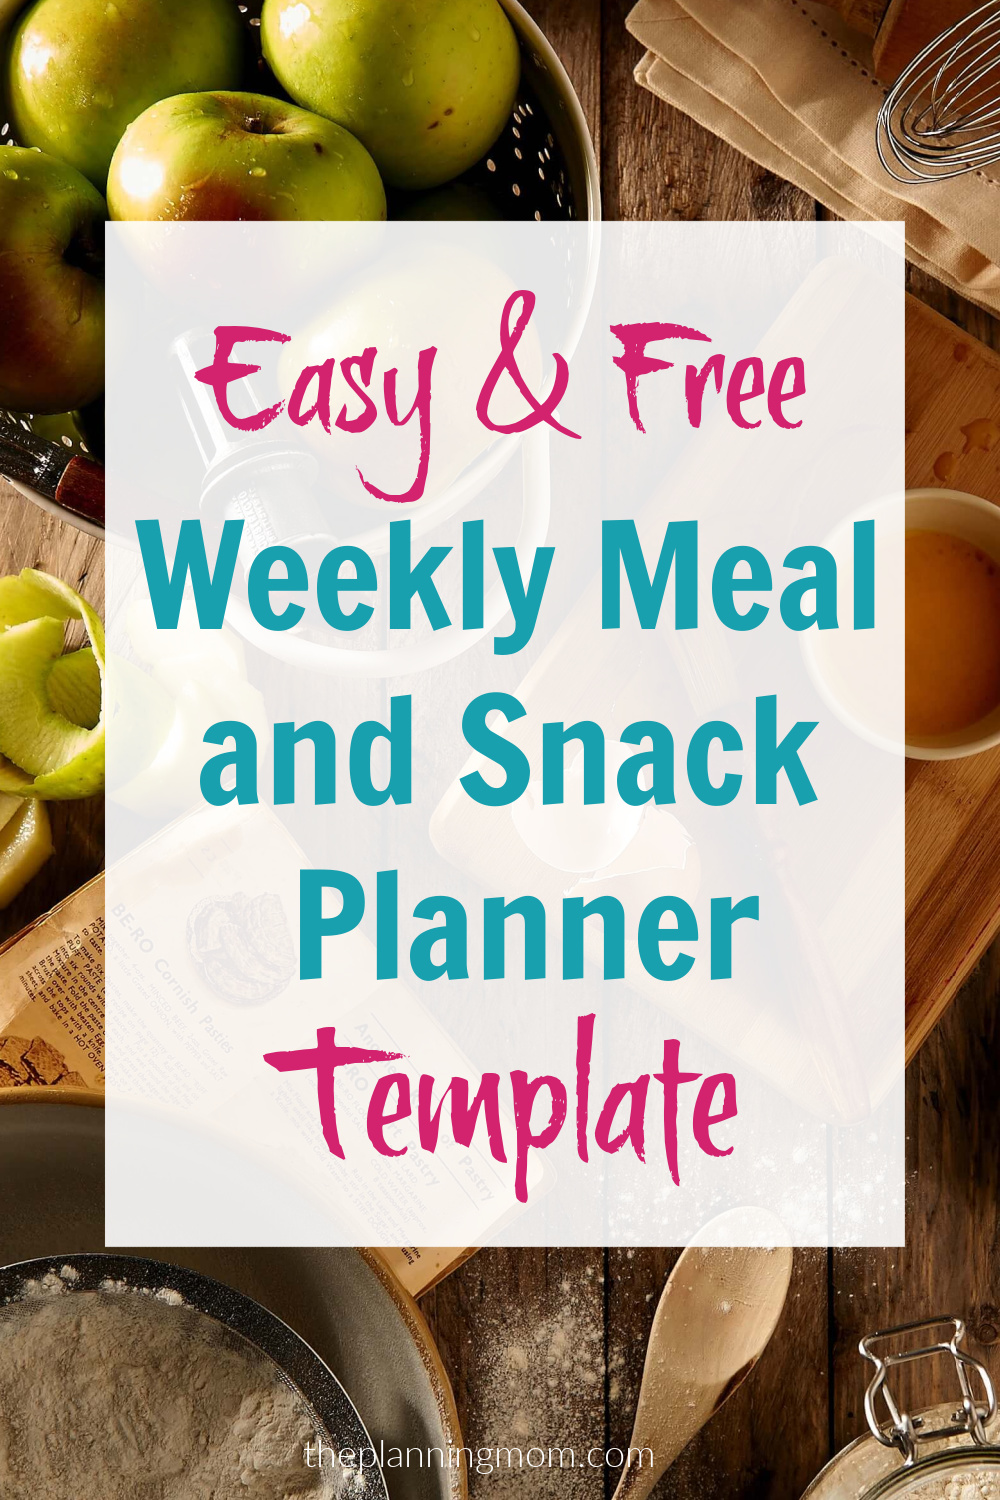 easy-free-weekly-meal-and-snack-planner-template-the-planning-mom